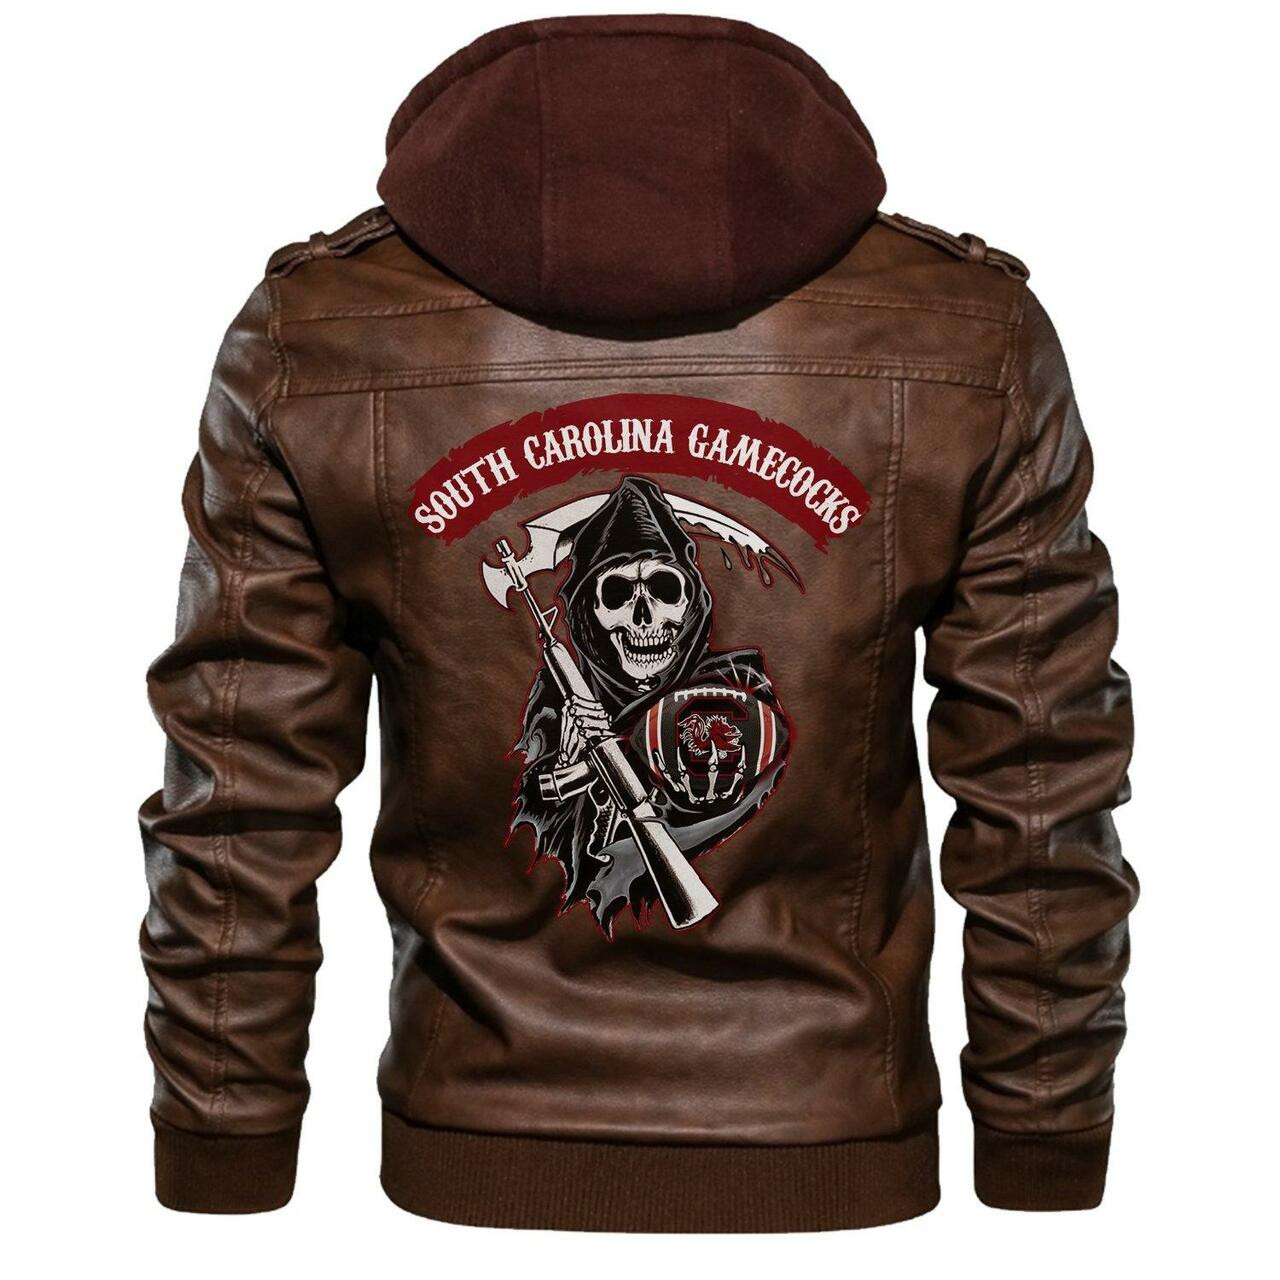 Check out and find the right leather jacket below 54